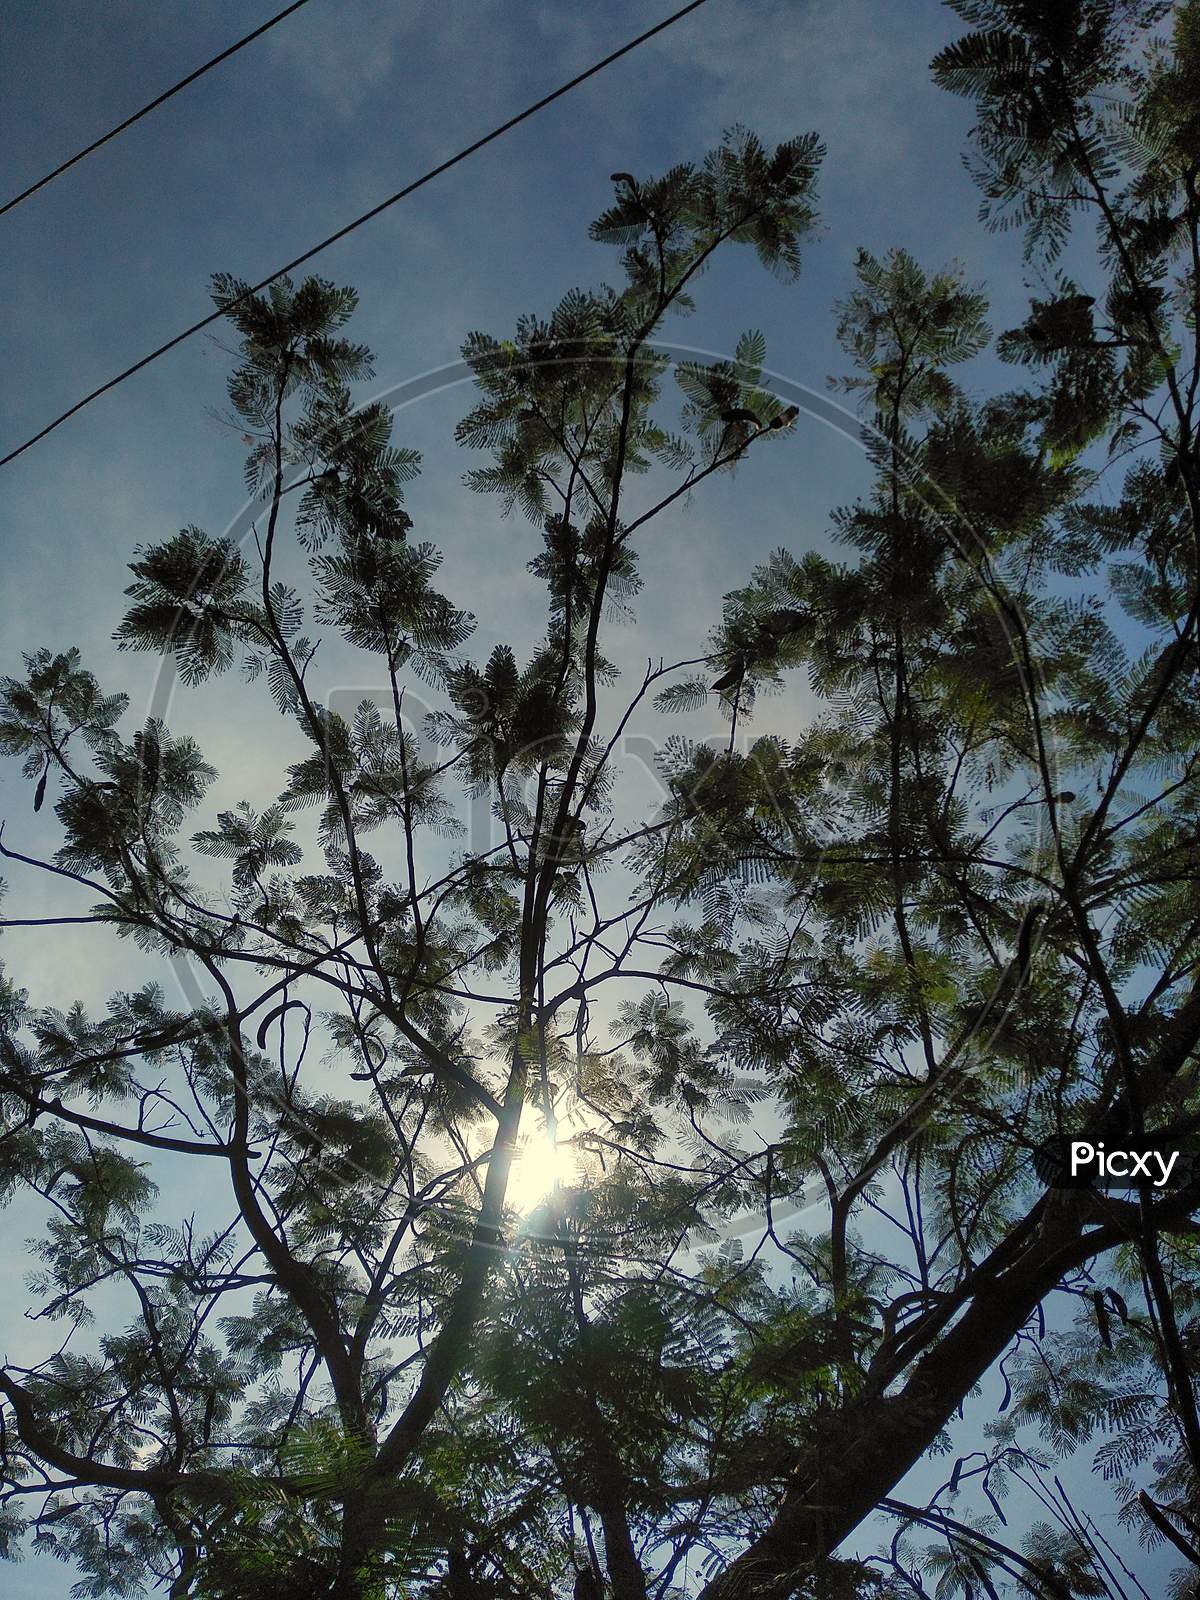 Sun is viewing through branches and leafs.